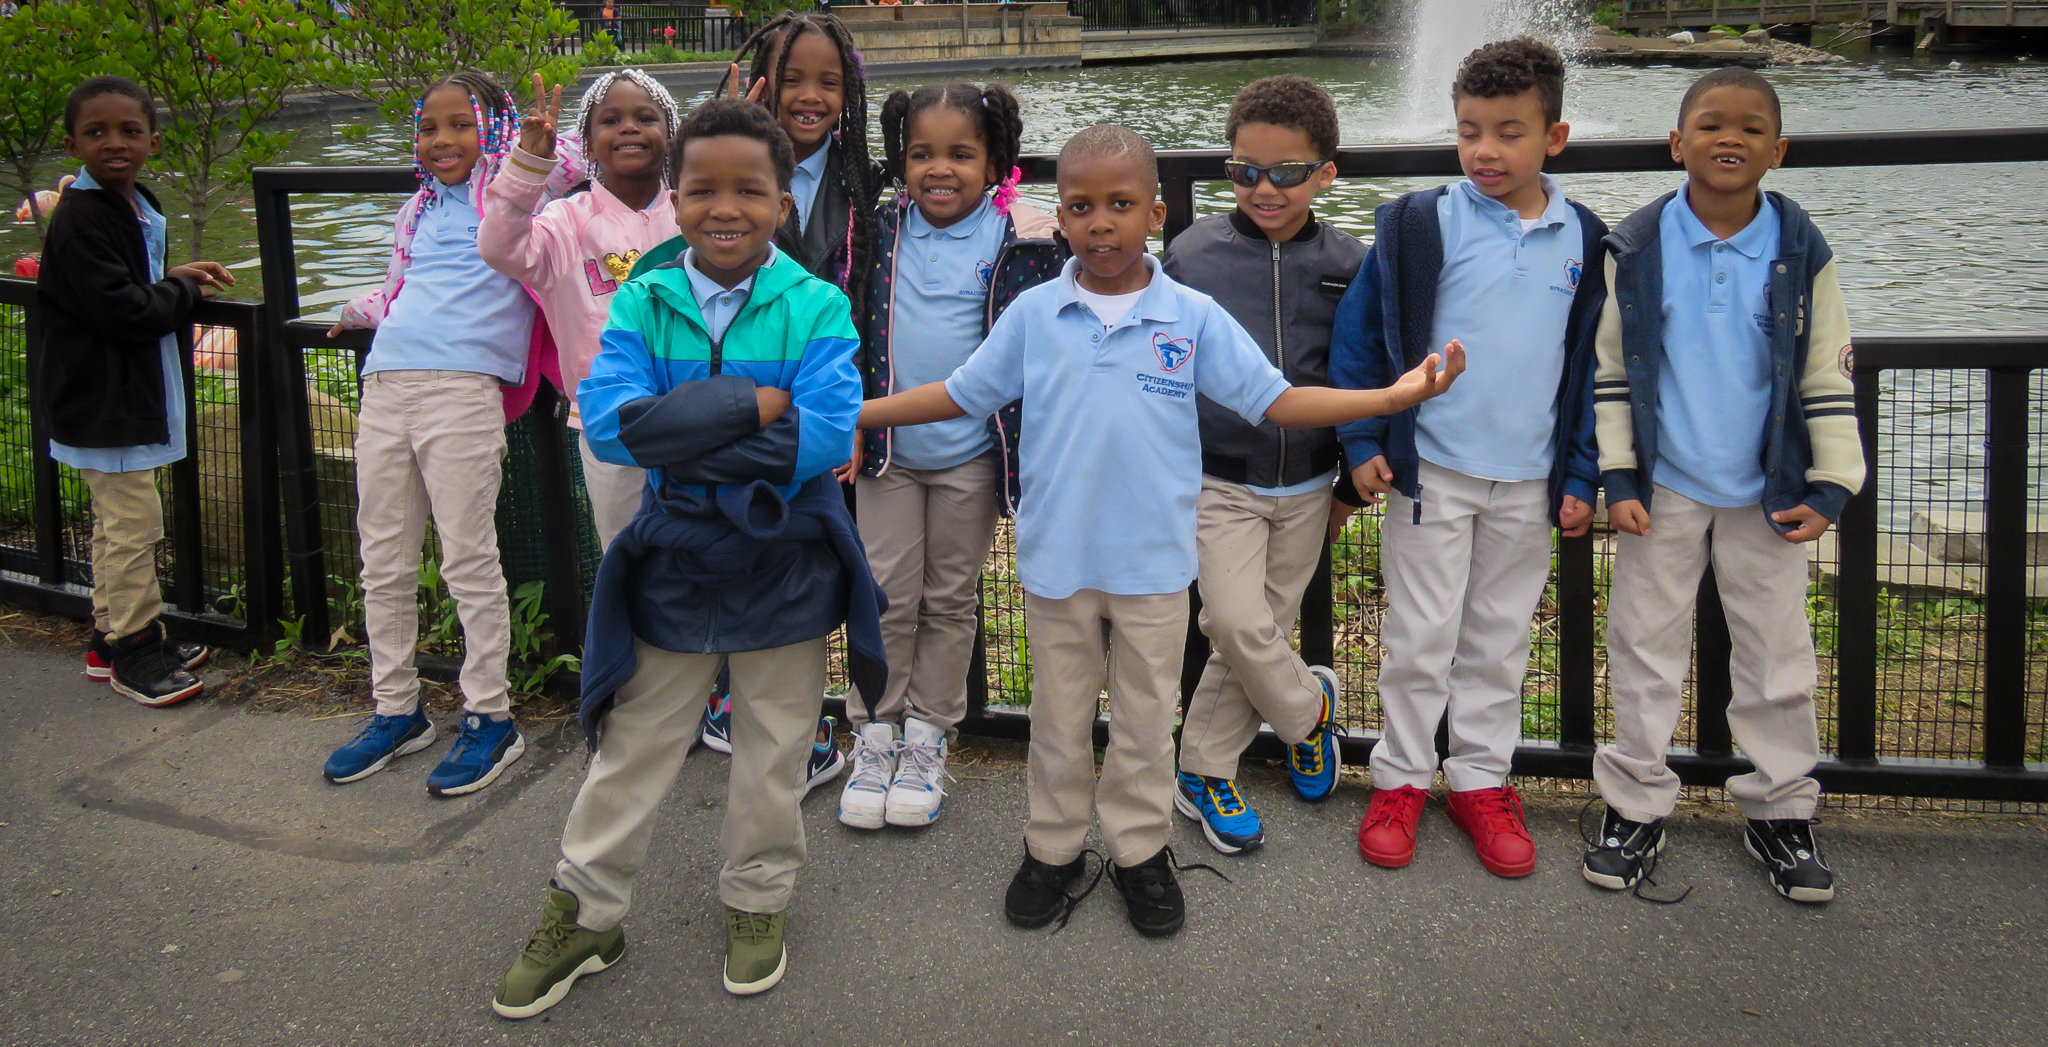 SASCCS Atoms had the best field trip day ever at Onondaga County Park's Rosamond Gifford Zoo